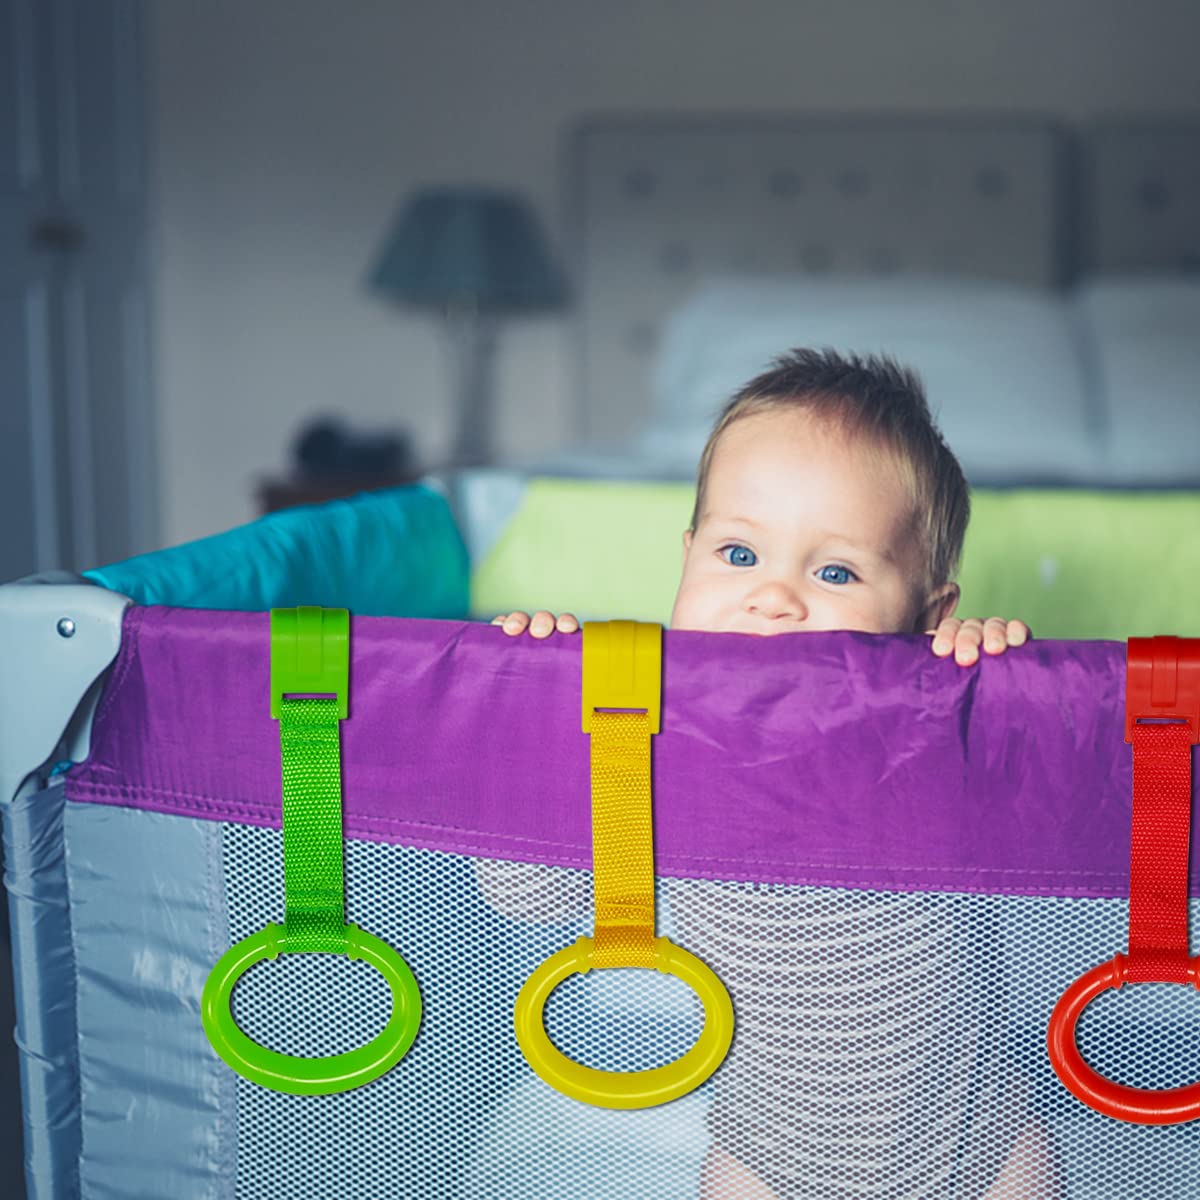 4 PCS 4 Colors Plastic Baby Crib Pull Rings Kids Walking Exercises Assistant Stand Up Rings Baby Cot Hanging Rings for Infant Baby Toddler Practice Tool